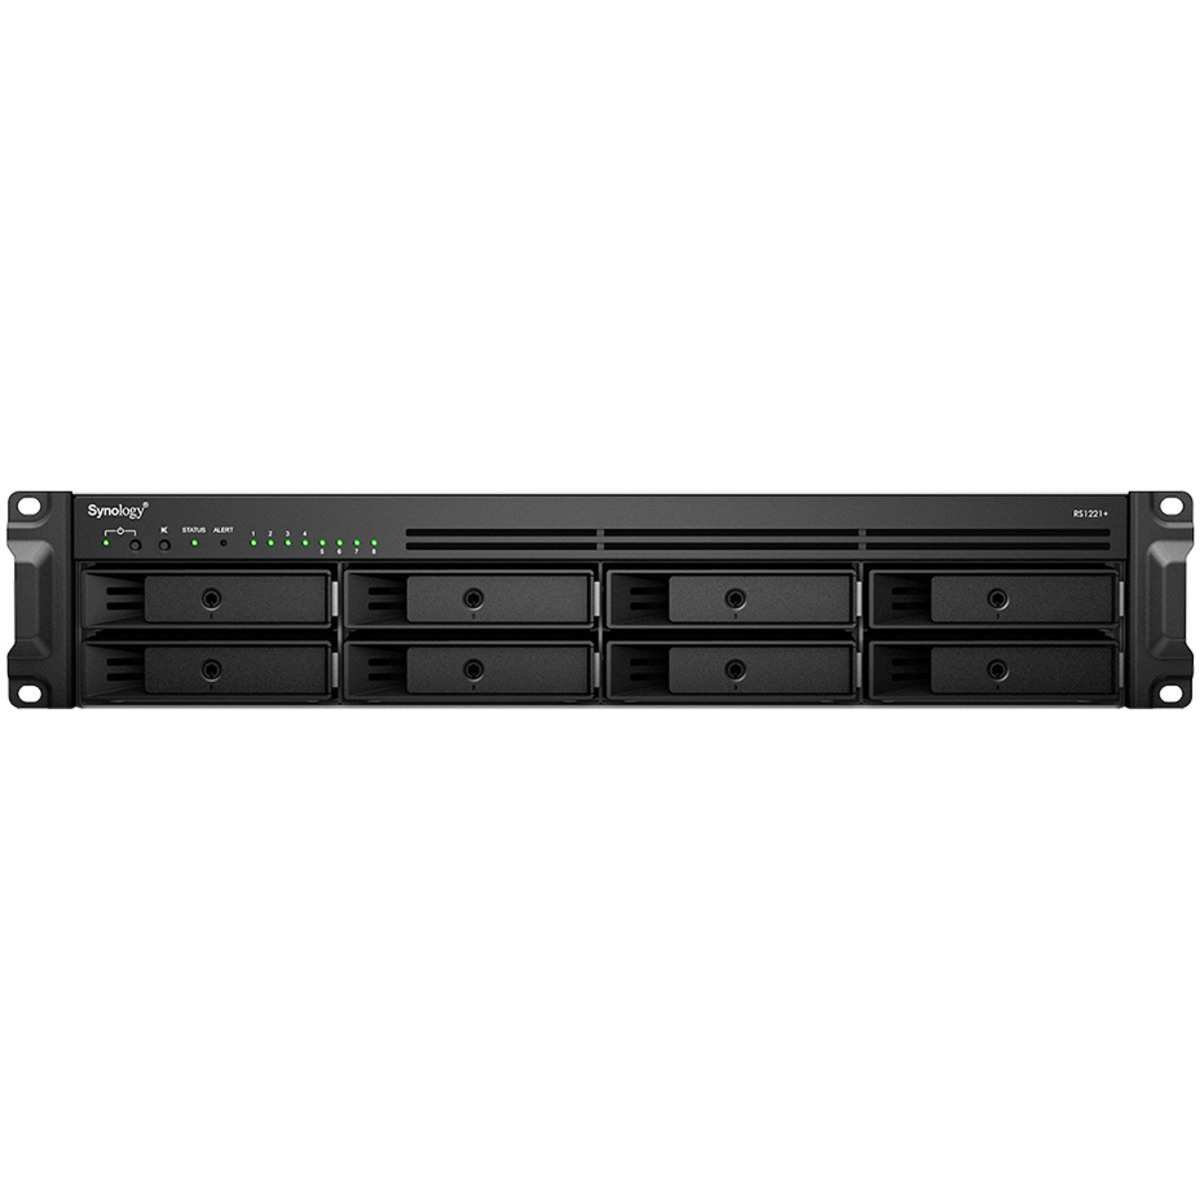 Synology RackStation RS1221RP+ 32tb 8-Bay RackMount Multimedia / Power User / Business NAS - Network Attached Storage Device 8x4tb Western Digital Red Pro WD4005FFBX 3.5 7200rpm SATA 6Gb/s HDD NAS Class Drives Installed - Burn-In Tested - FREE RAM UPGRADE RackStation RS1221RP+